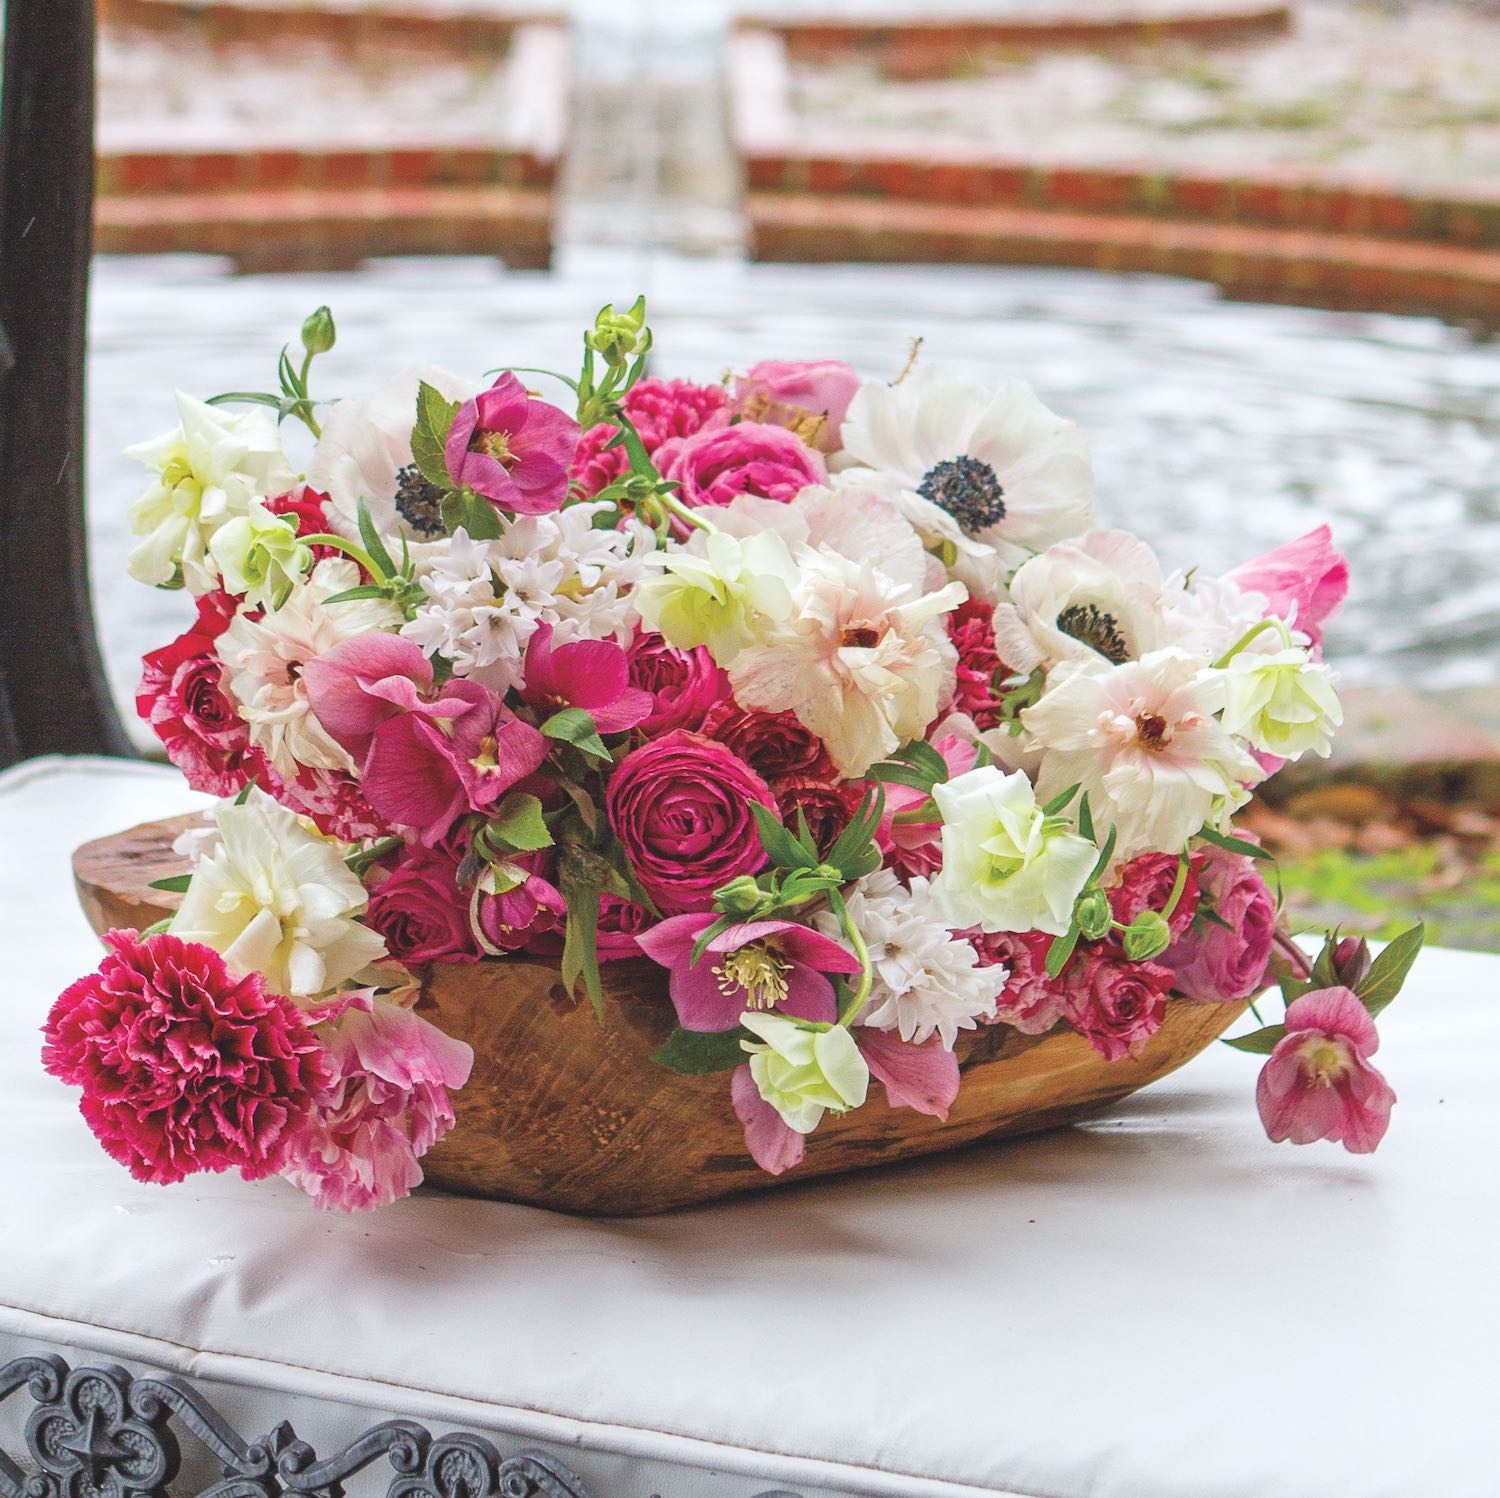 Kim Starr Wise fills a wooden bowl with pink flowers: Japanese ranunculus, anemones, hyacinths, carnations, hellebores, and garden spray roses in hues of pink.